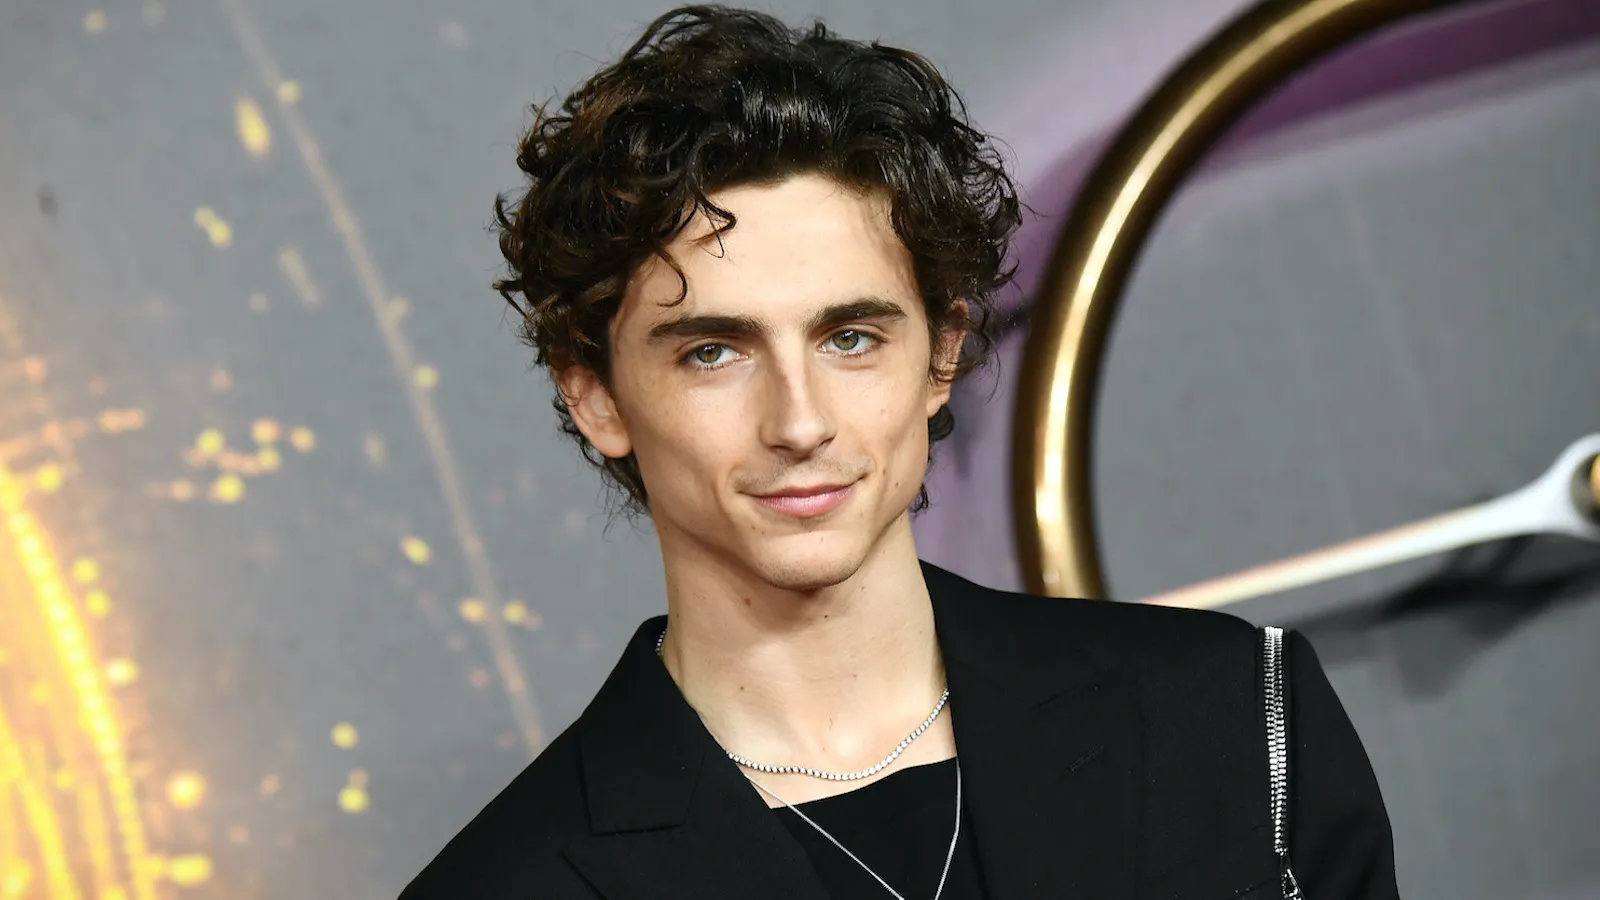 How tall is Timothée Chalamet? Here’s his height, age, birthday, and ethnicity